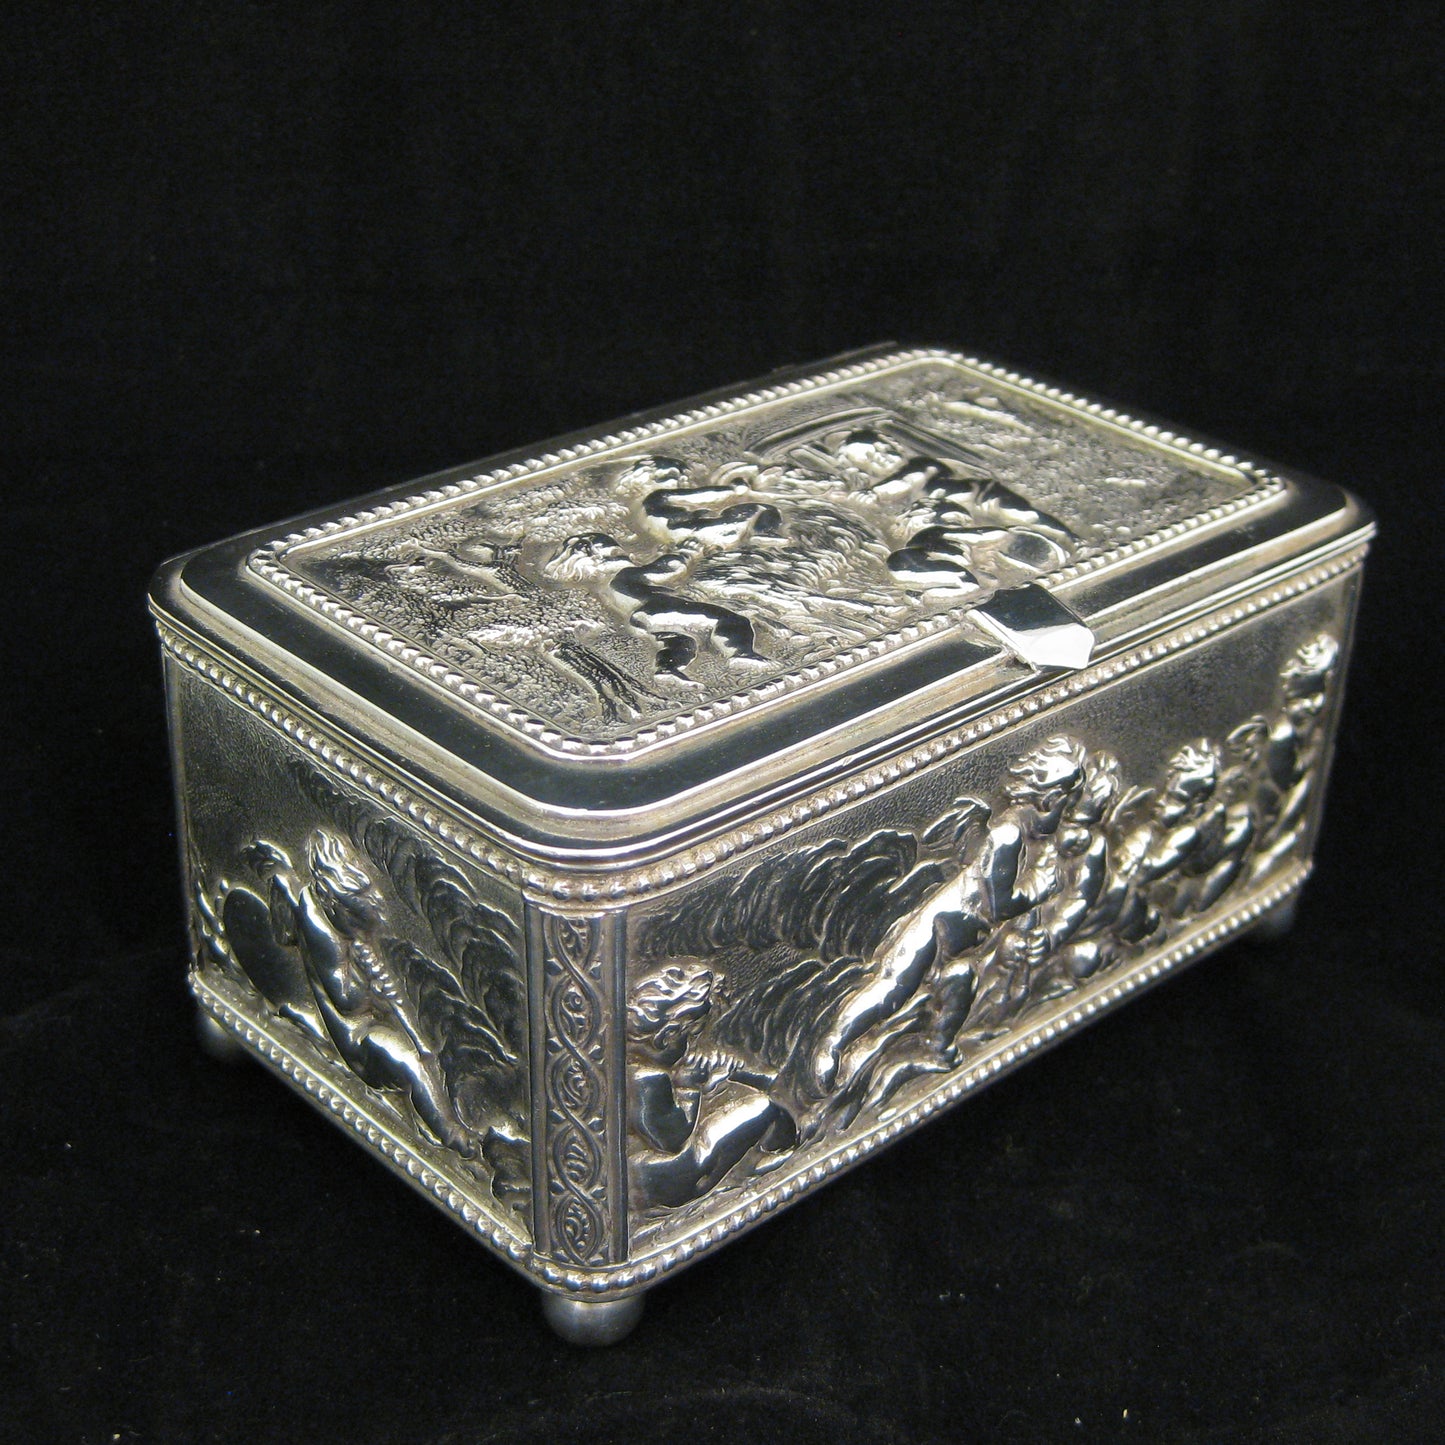 An relief electrotype jewelry box.